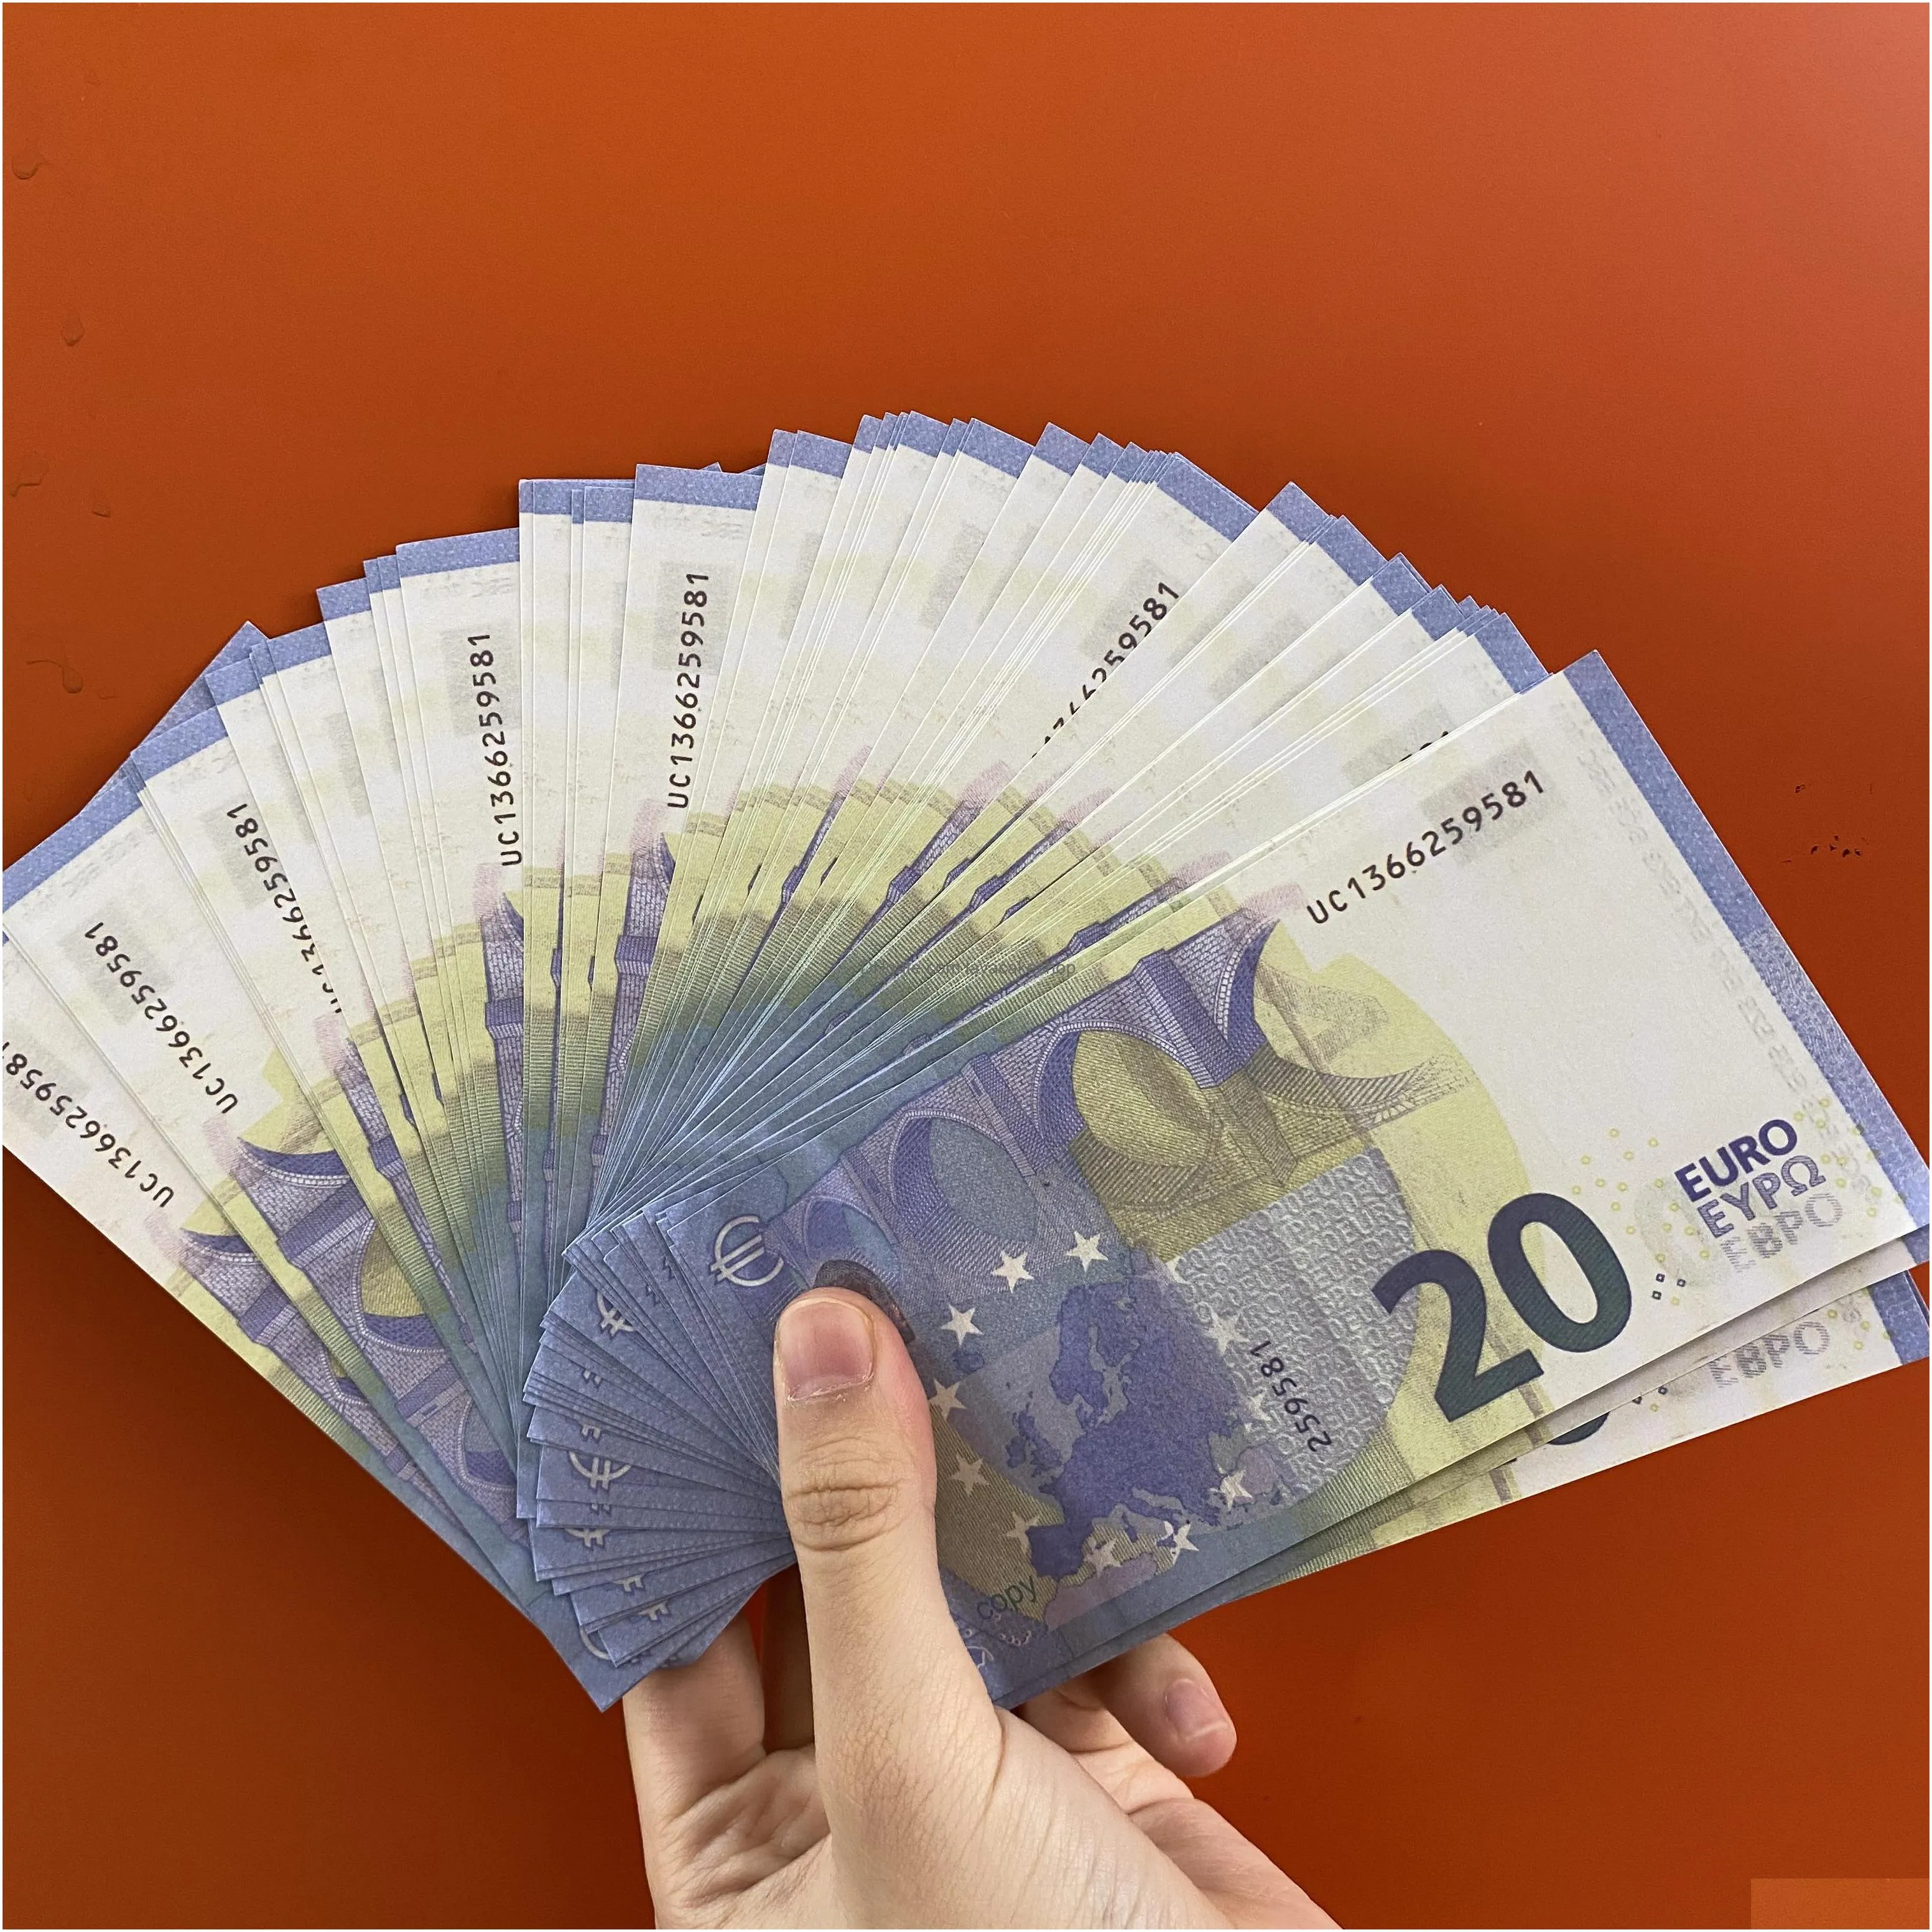 20 money paper realistic prop copy for euros movie play note nightclub business fake collection bank most 23 uxvsj